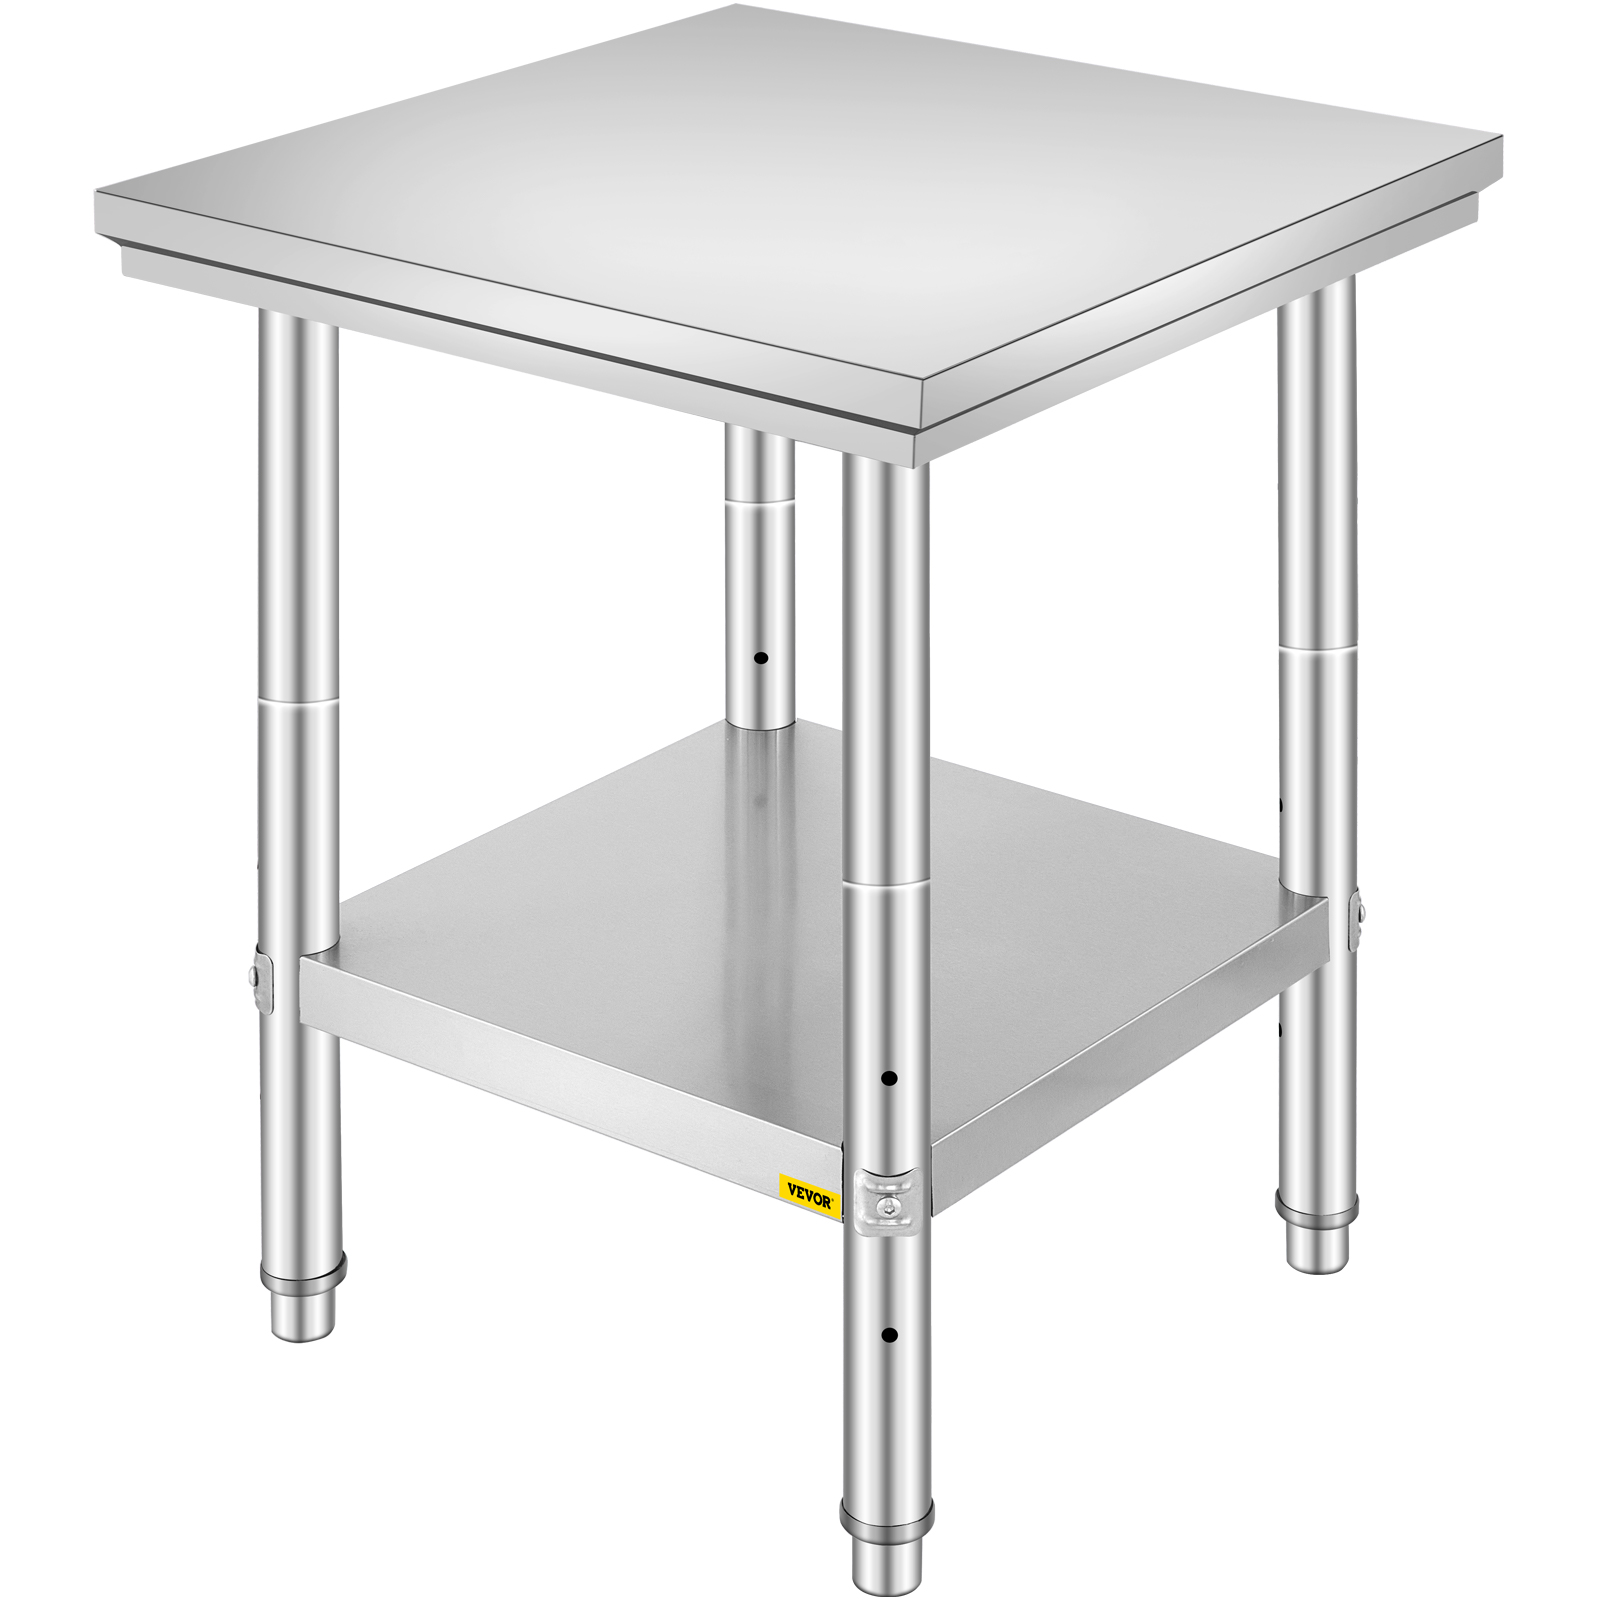 24" X 24" Stainless Steel Kitchen Work Prep Table Food Commercial Shelving от Vevor Many GEOs